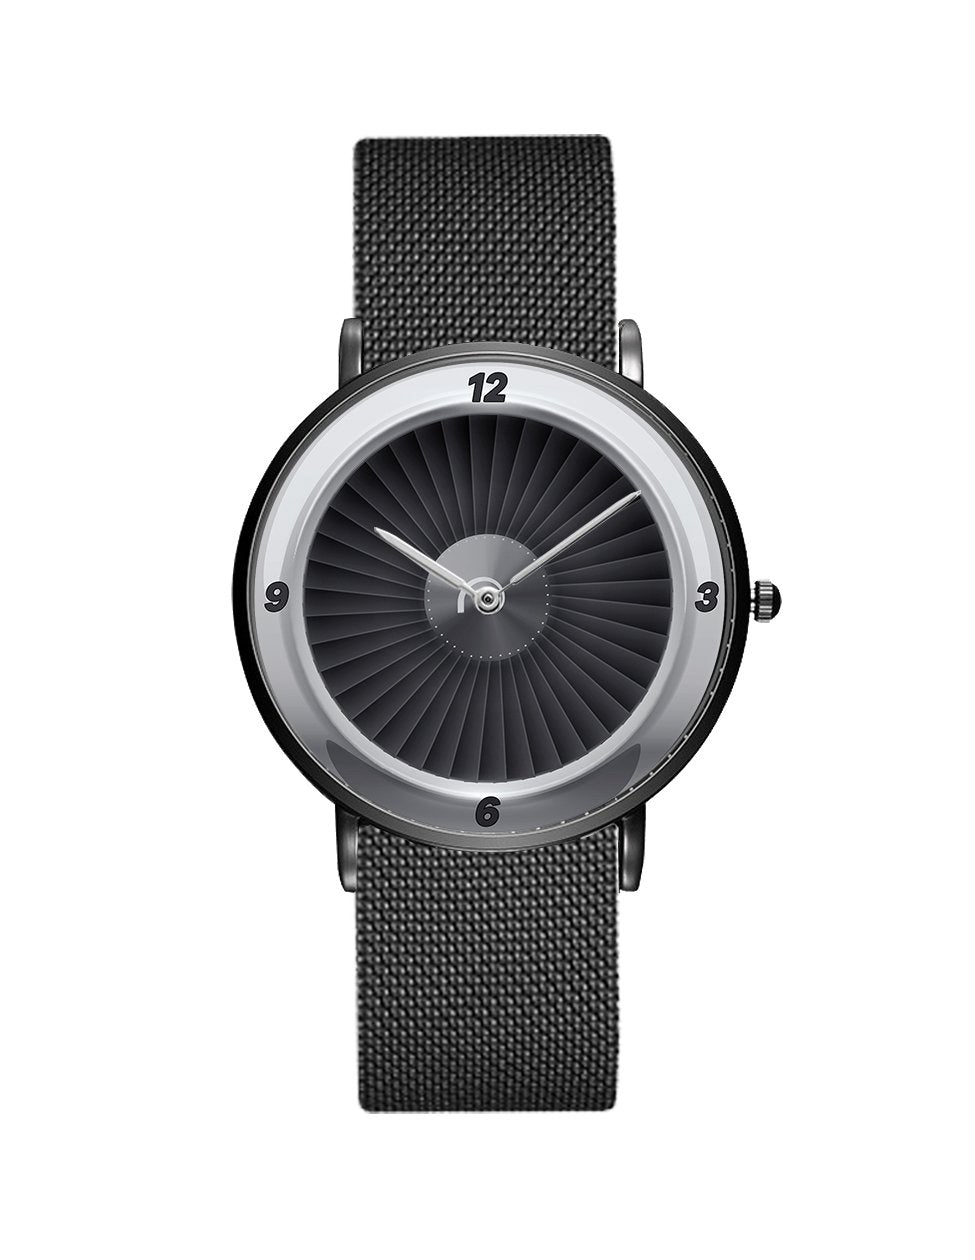 Jet Engine Designed Stainless Steel Strap Watches Pilot Eyes Store Black & Stainless Steel Strap 